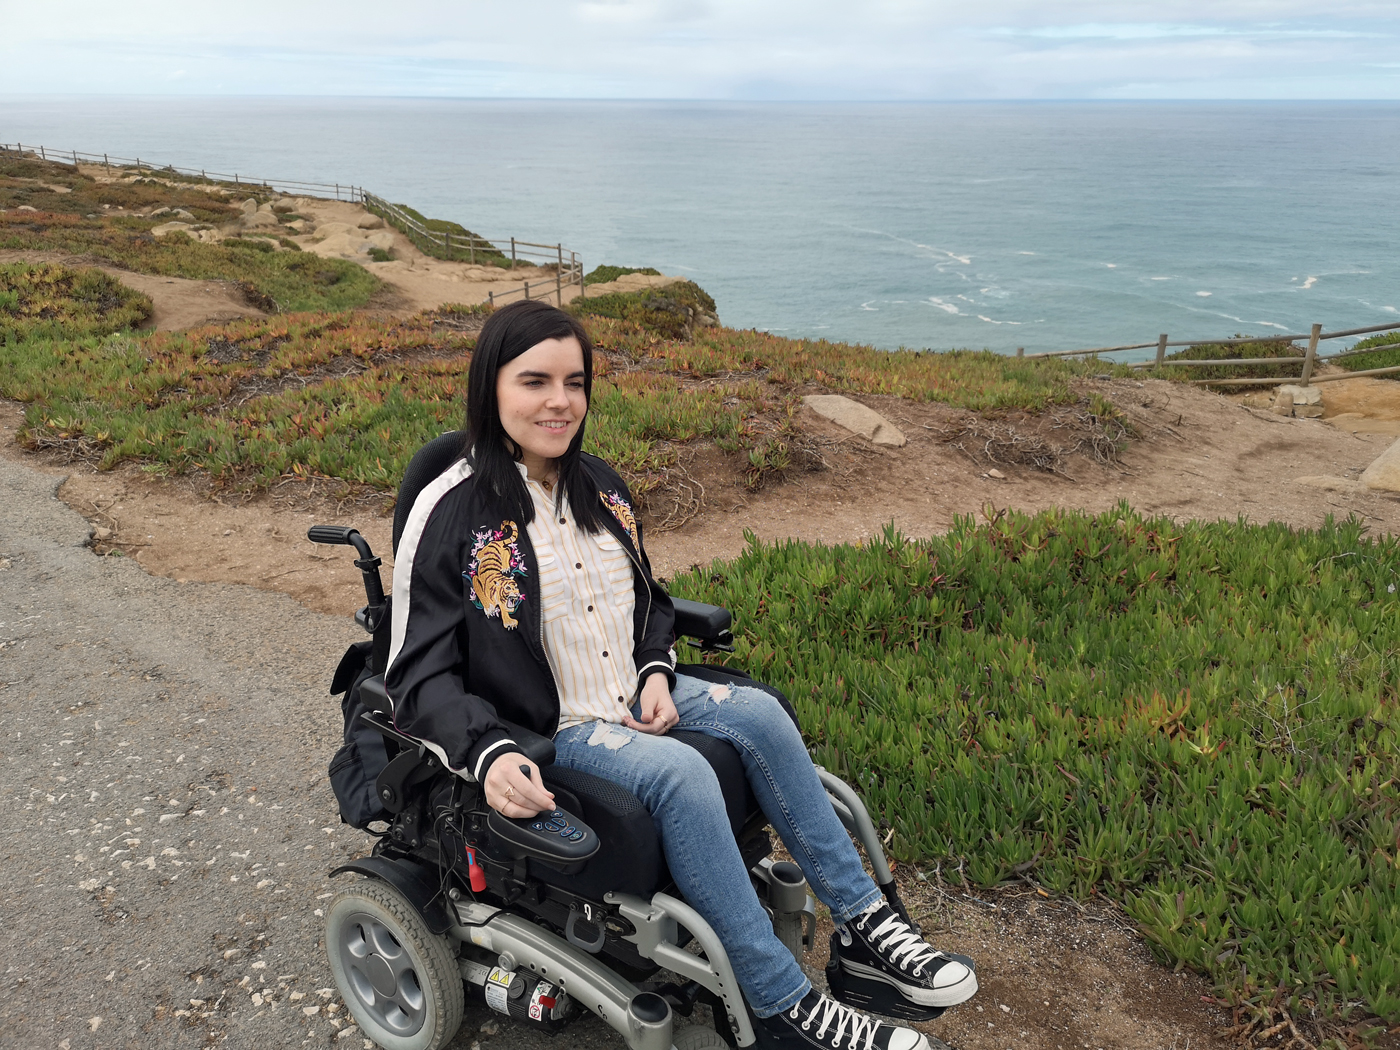 Emma in her wheelchair sitting with the ocean behind her in Portugal.